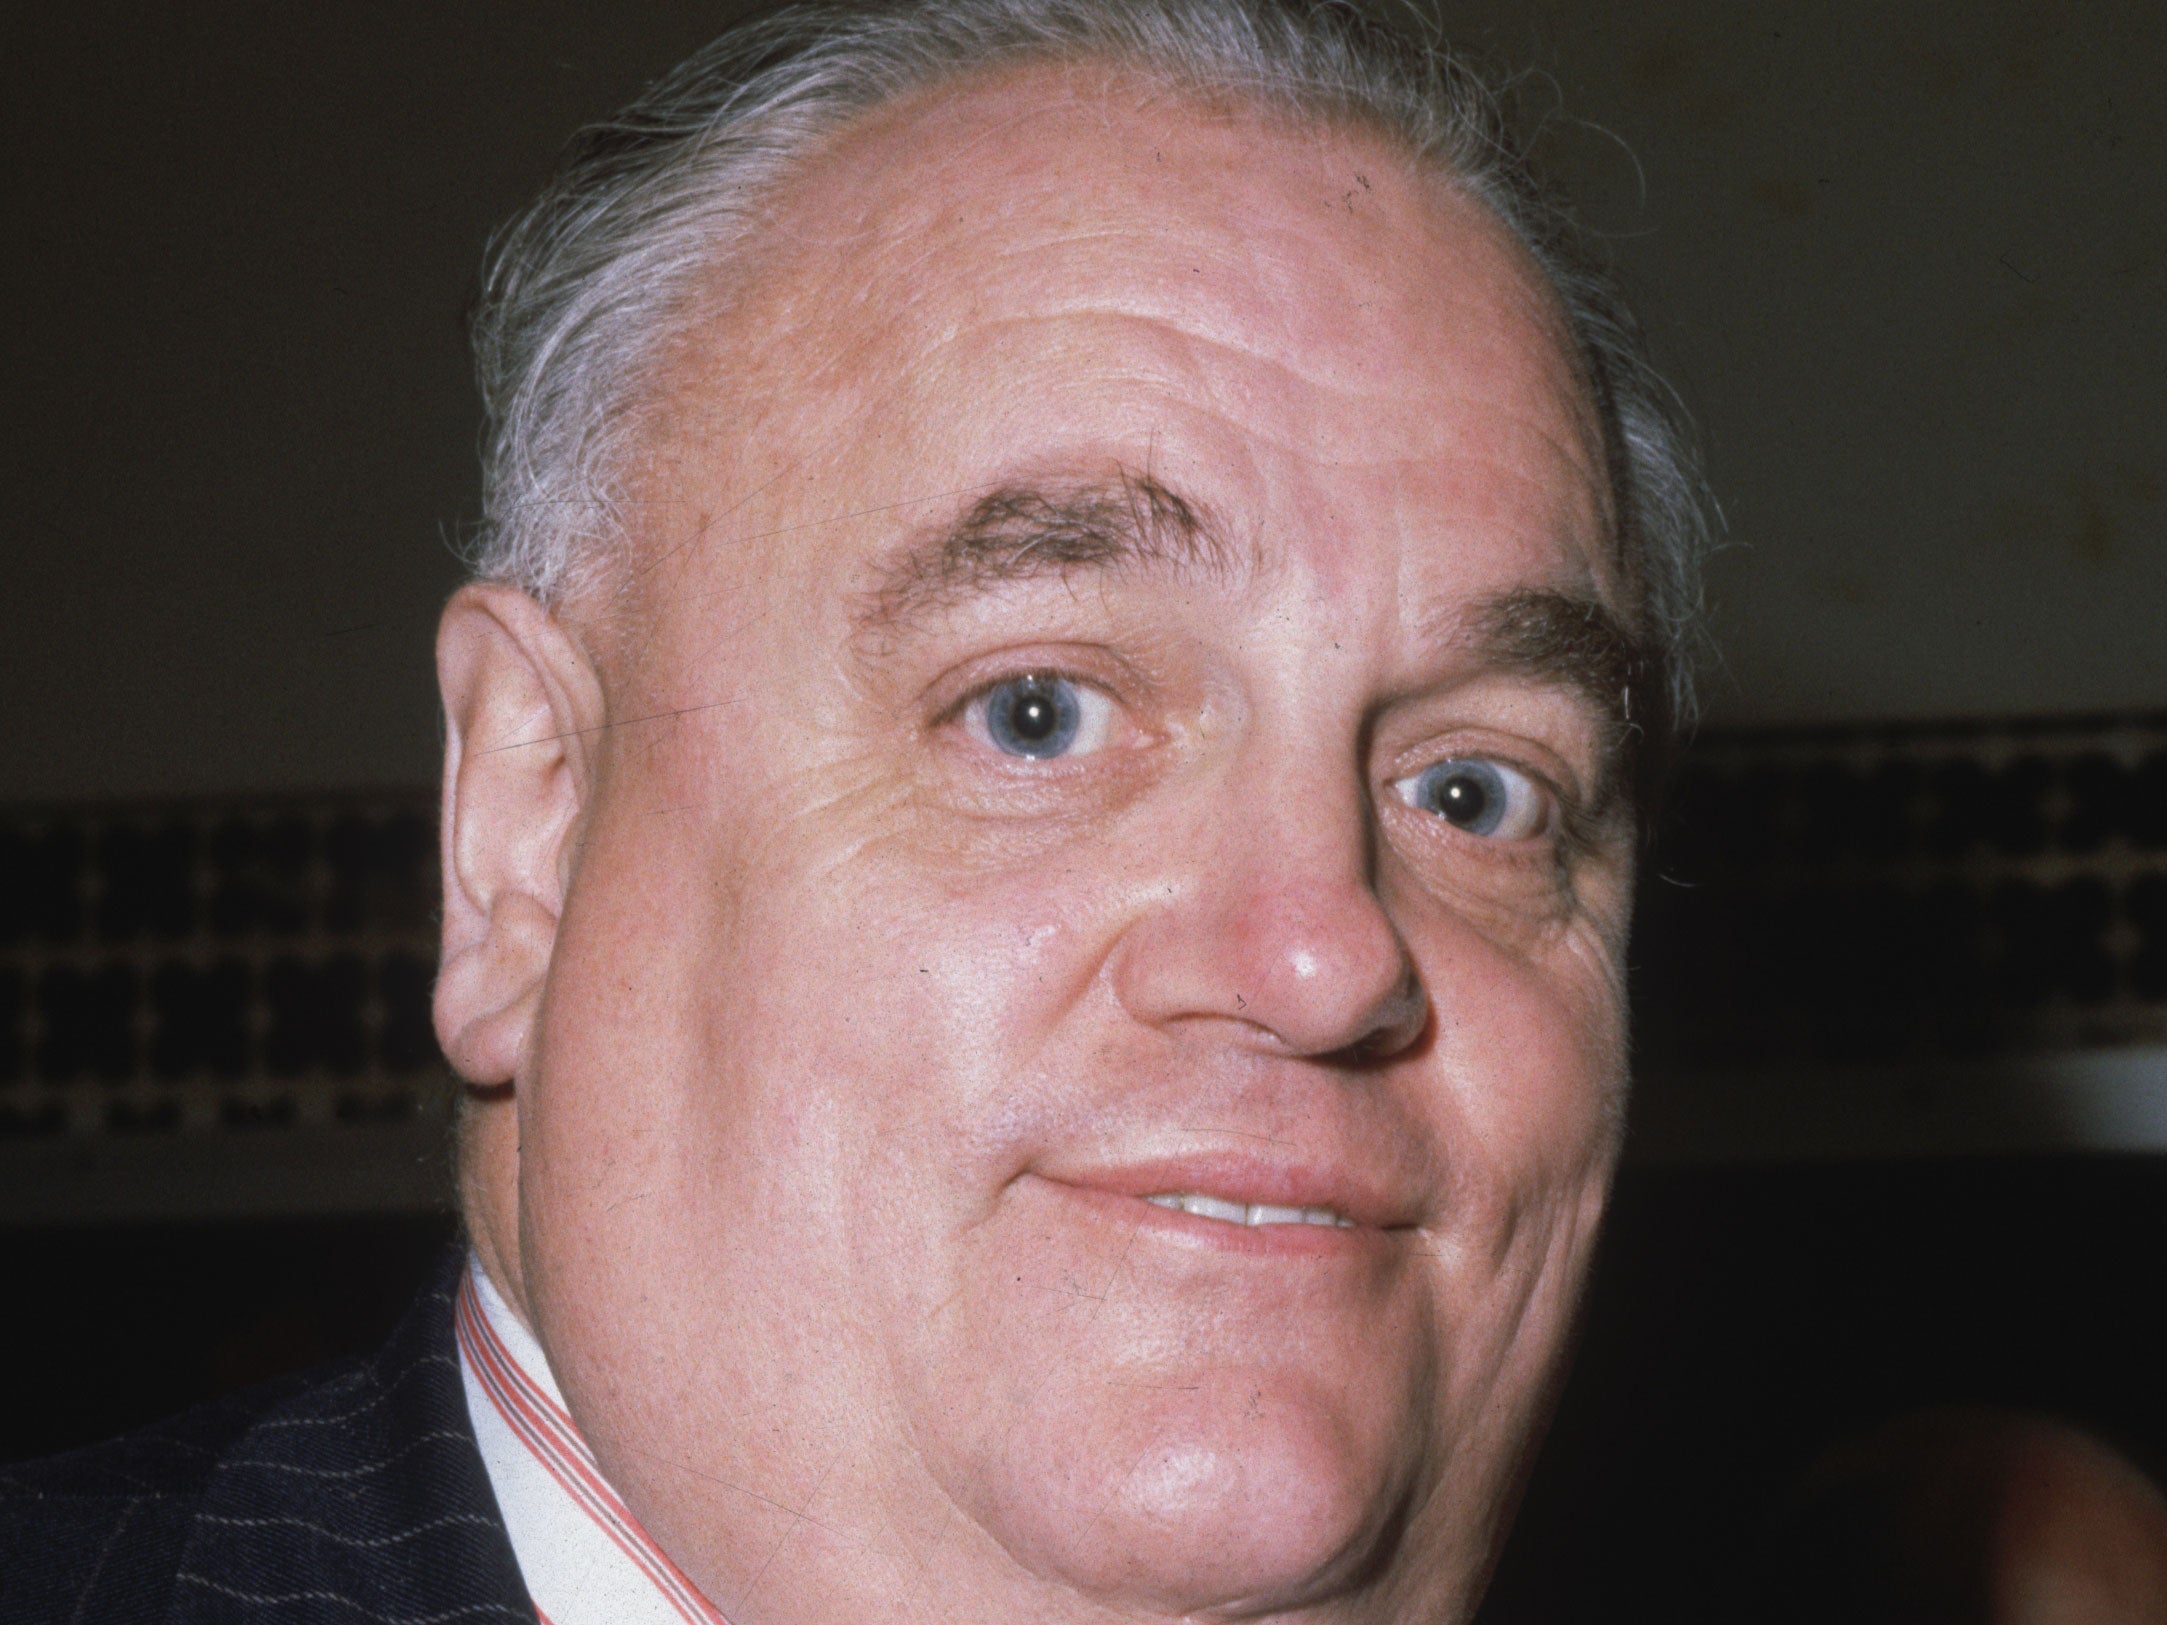 Cyril Smith, the former Liberal MP for Rochdale pictured circa 1980